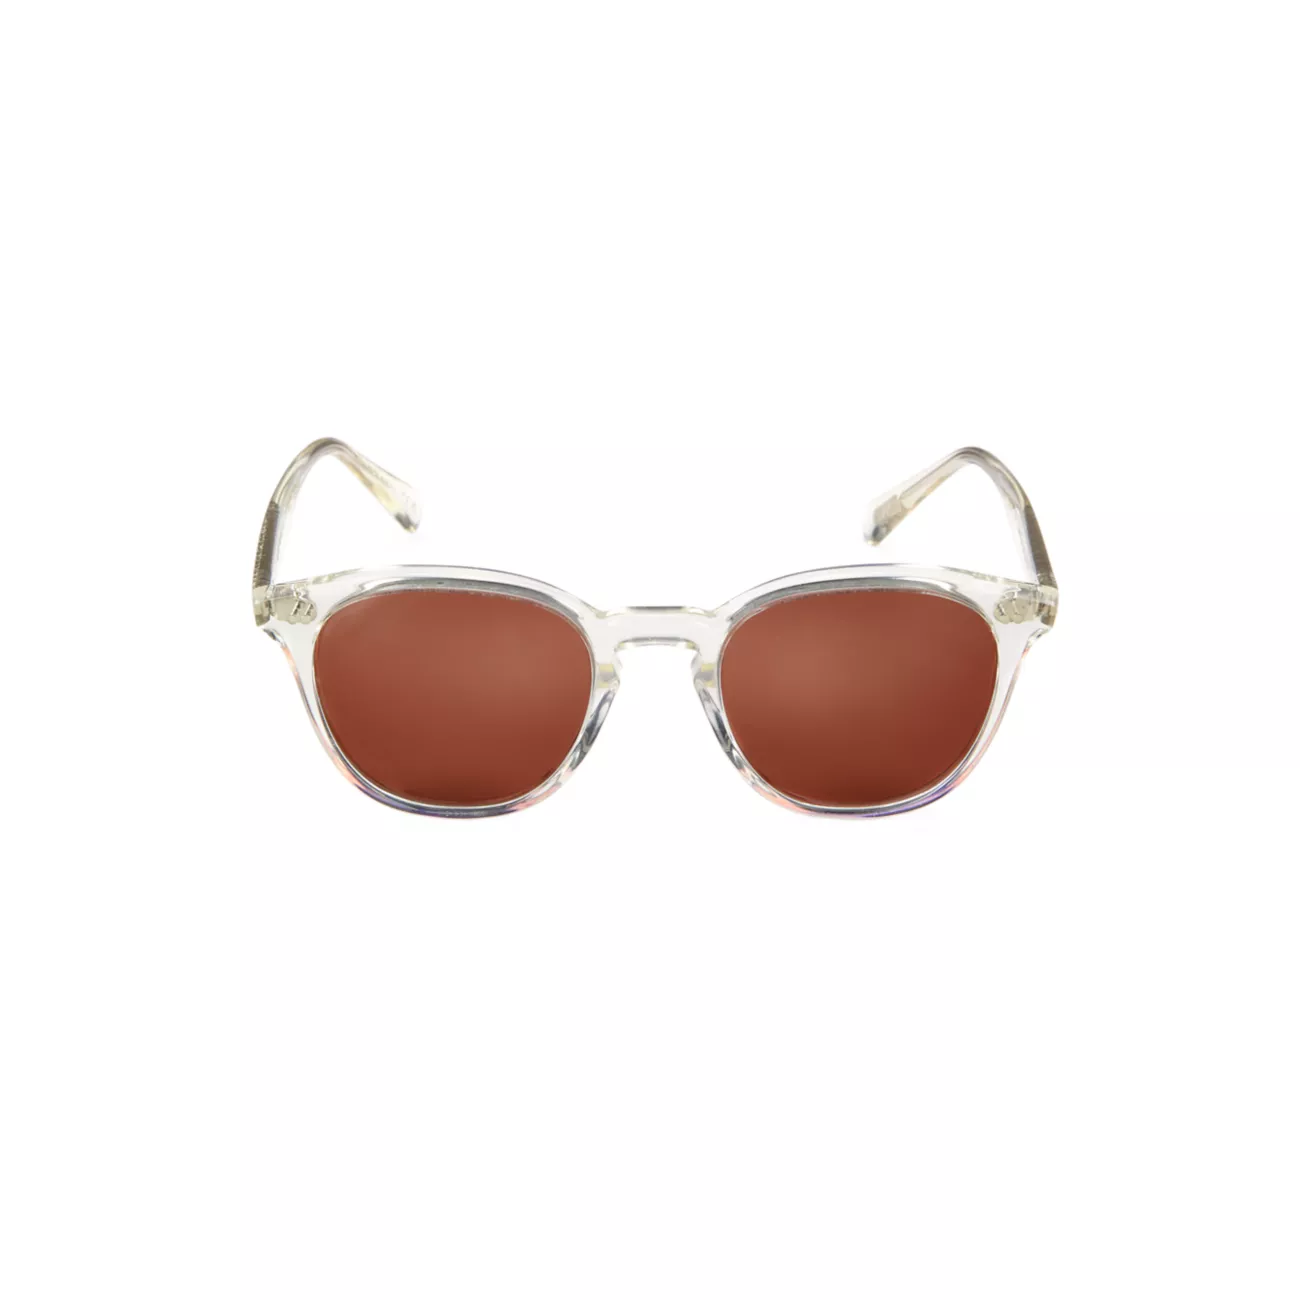 50MM Rounded Acetate Sunglasses Oliver Peoples